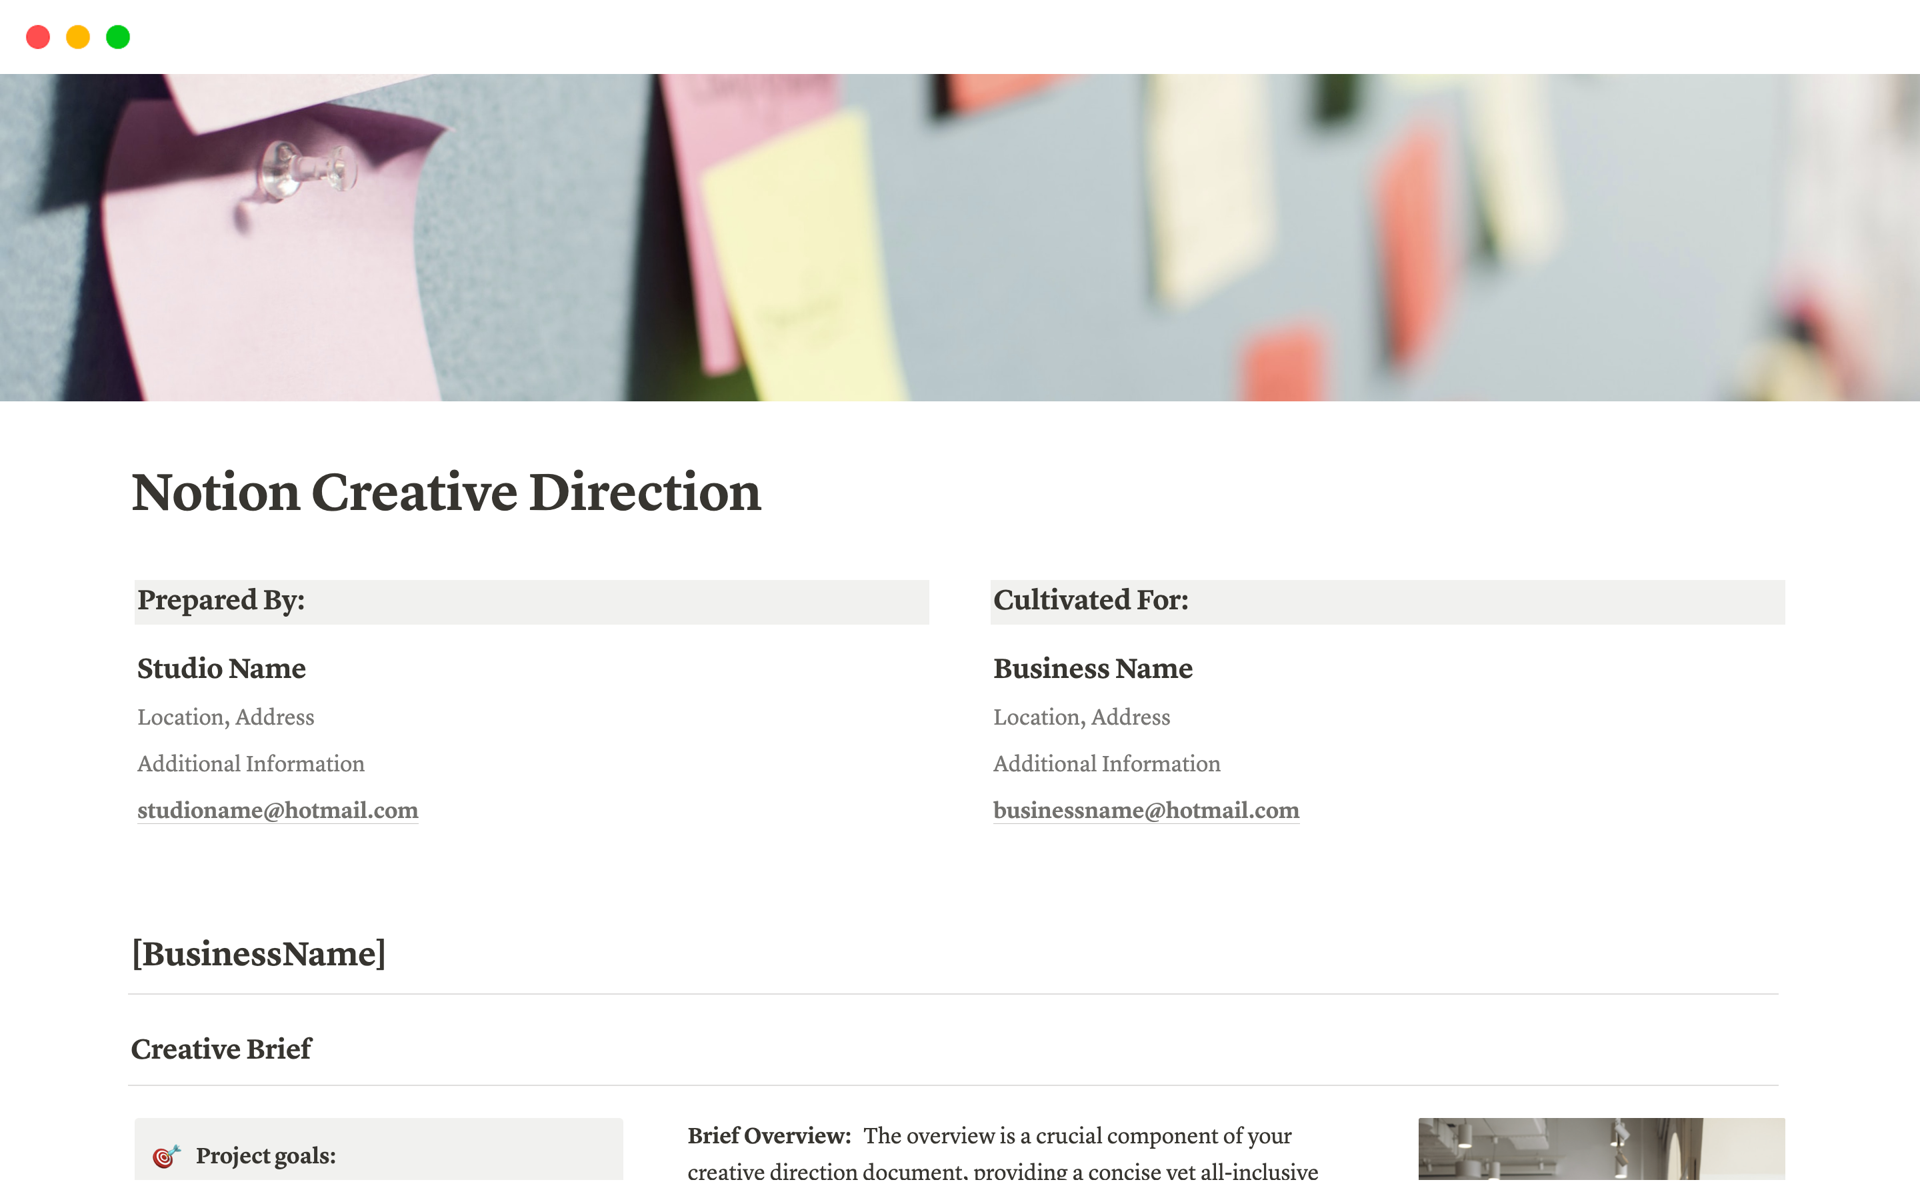 PRESENTING OUR CREATIVE DIRECTION TEMPLATE FOR NOTION!
